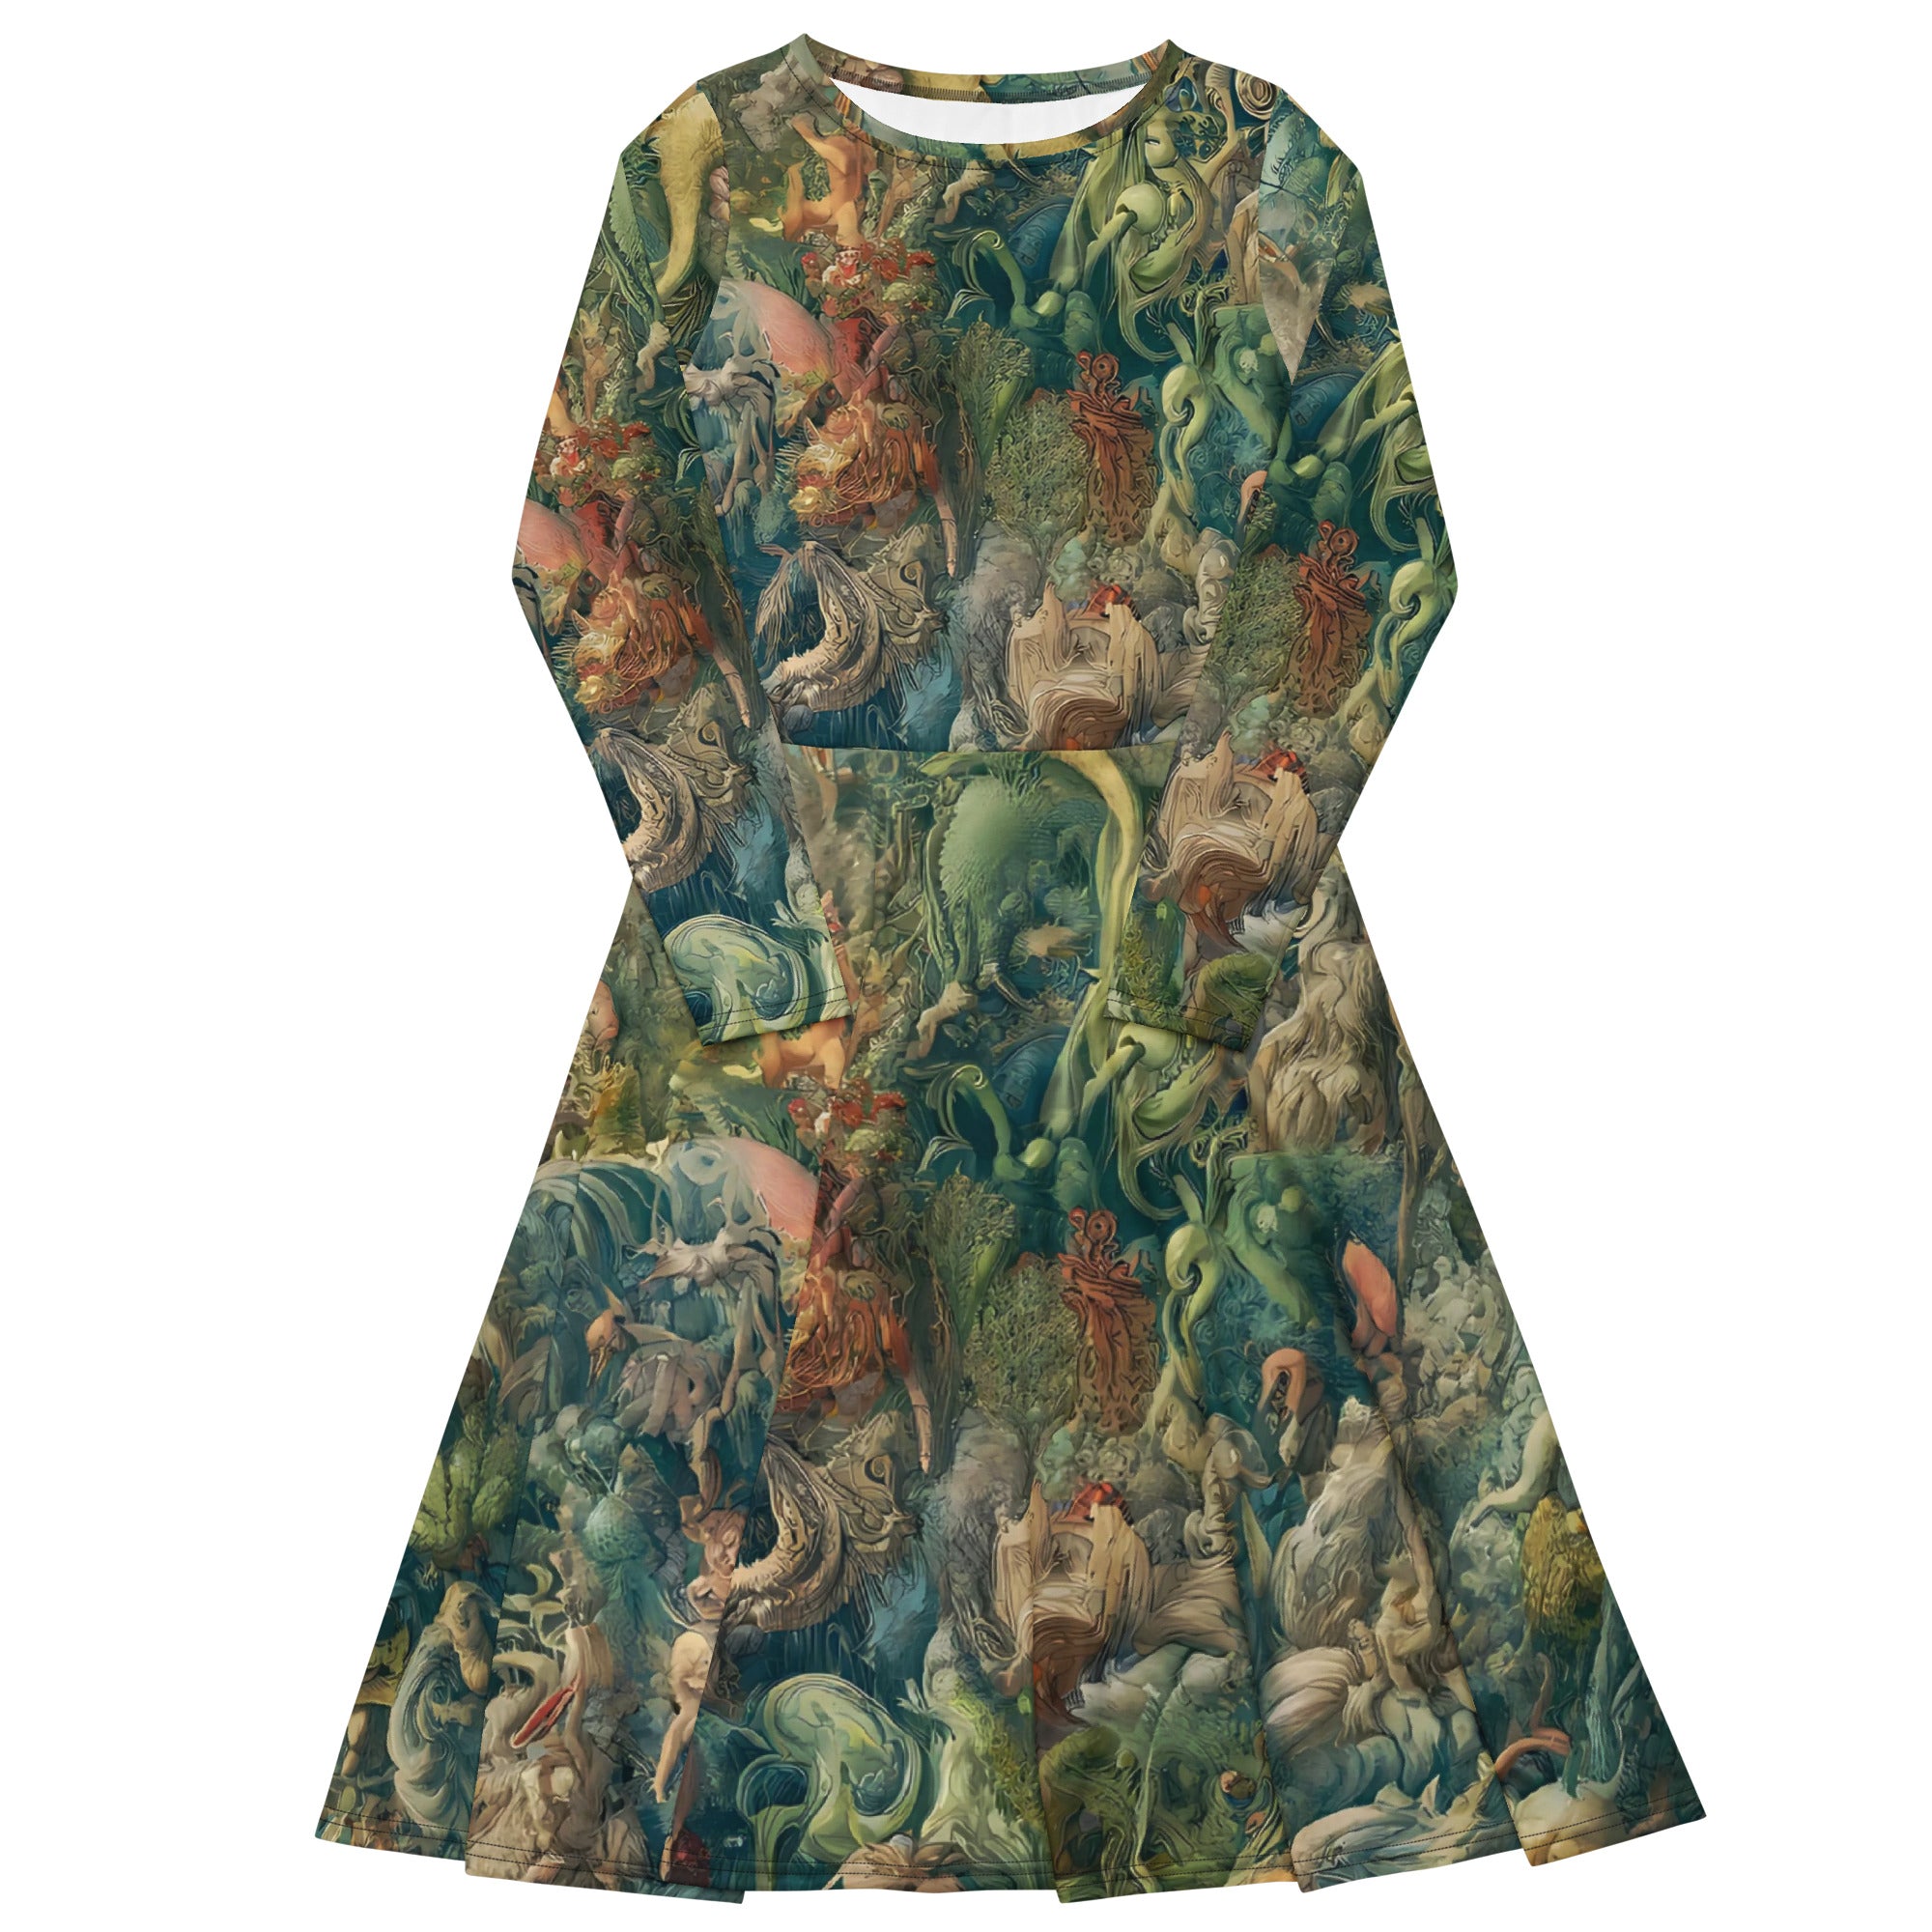 Hieronymus Bosch 'The Garden of Earthly Delights' Famous Painting Long Sleeve Midi Dress | Premium Art Midi Dress